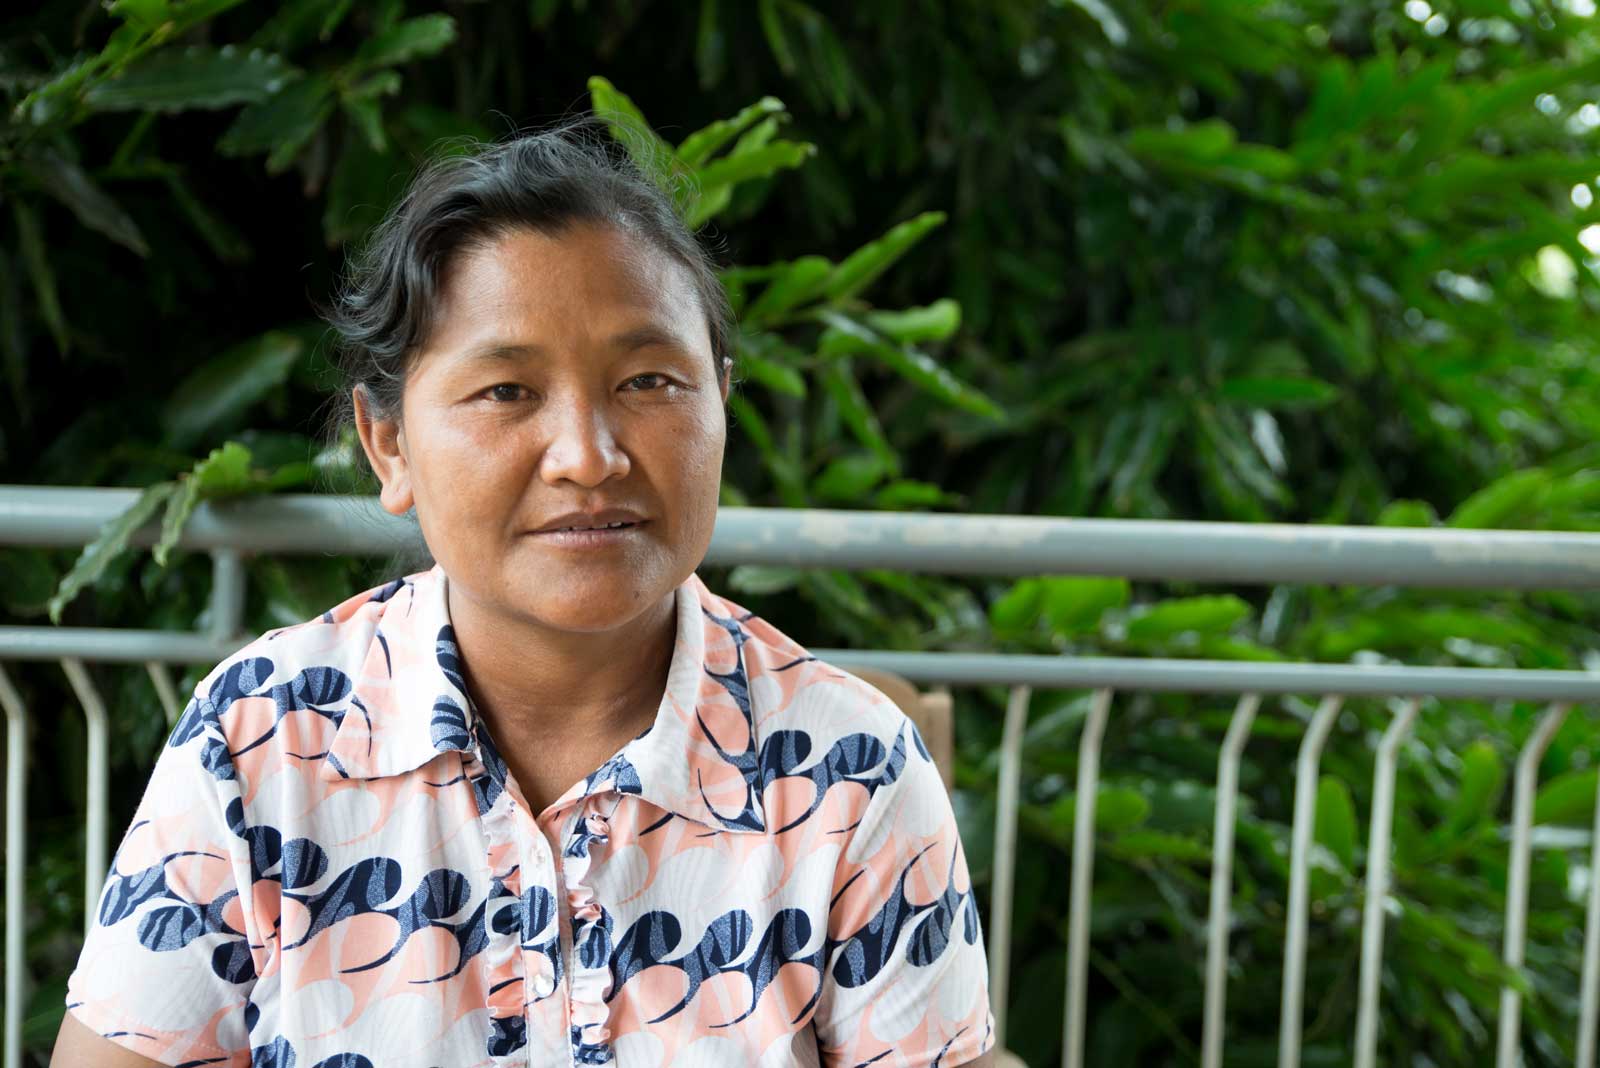 Nadhaw is committed to preventing at-risk youth in her village from becoming drug users.